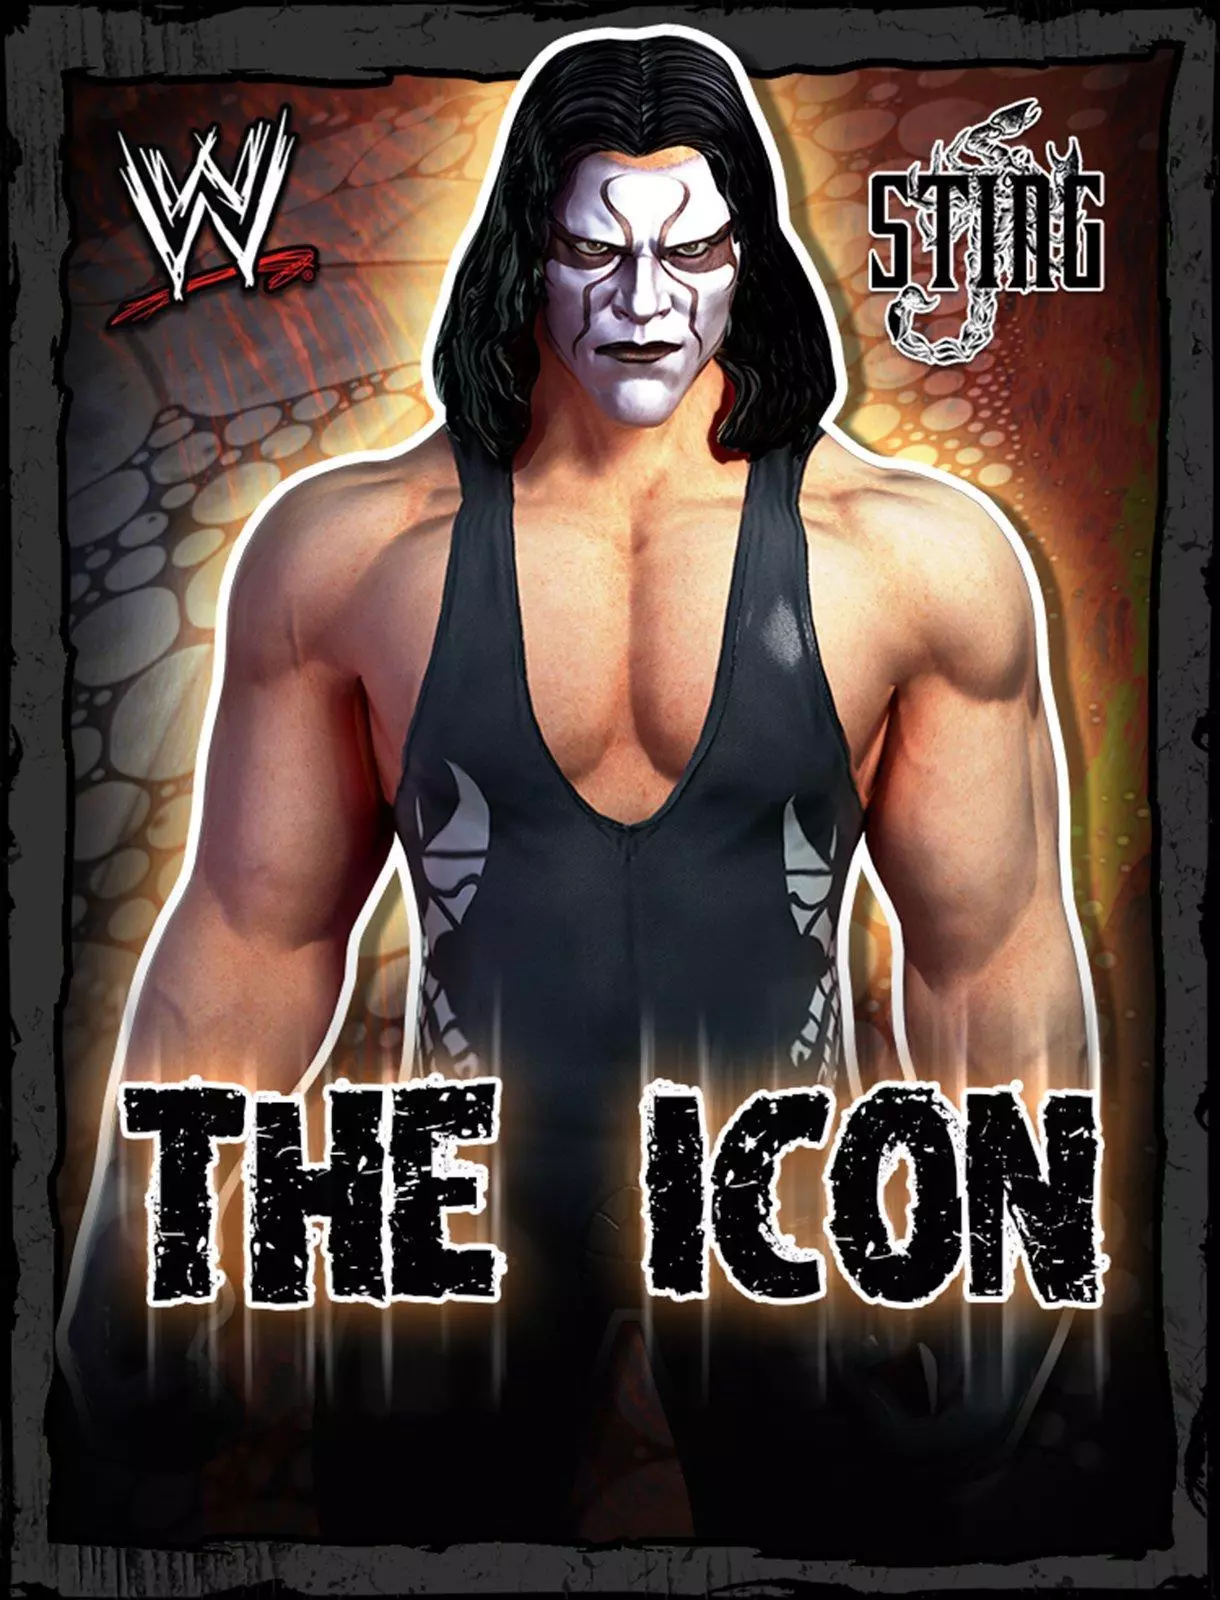 Sting '97 - WWE Champions Roster Profile